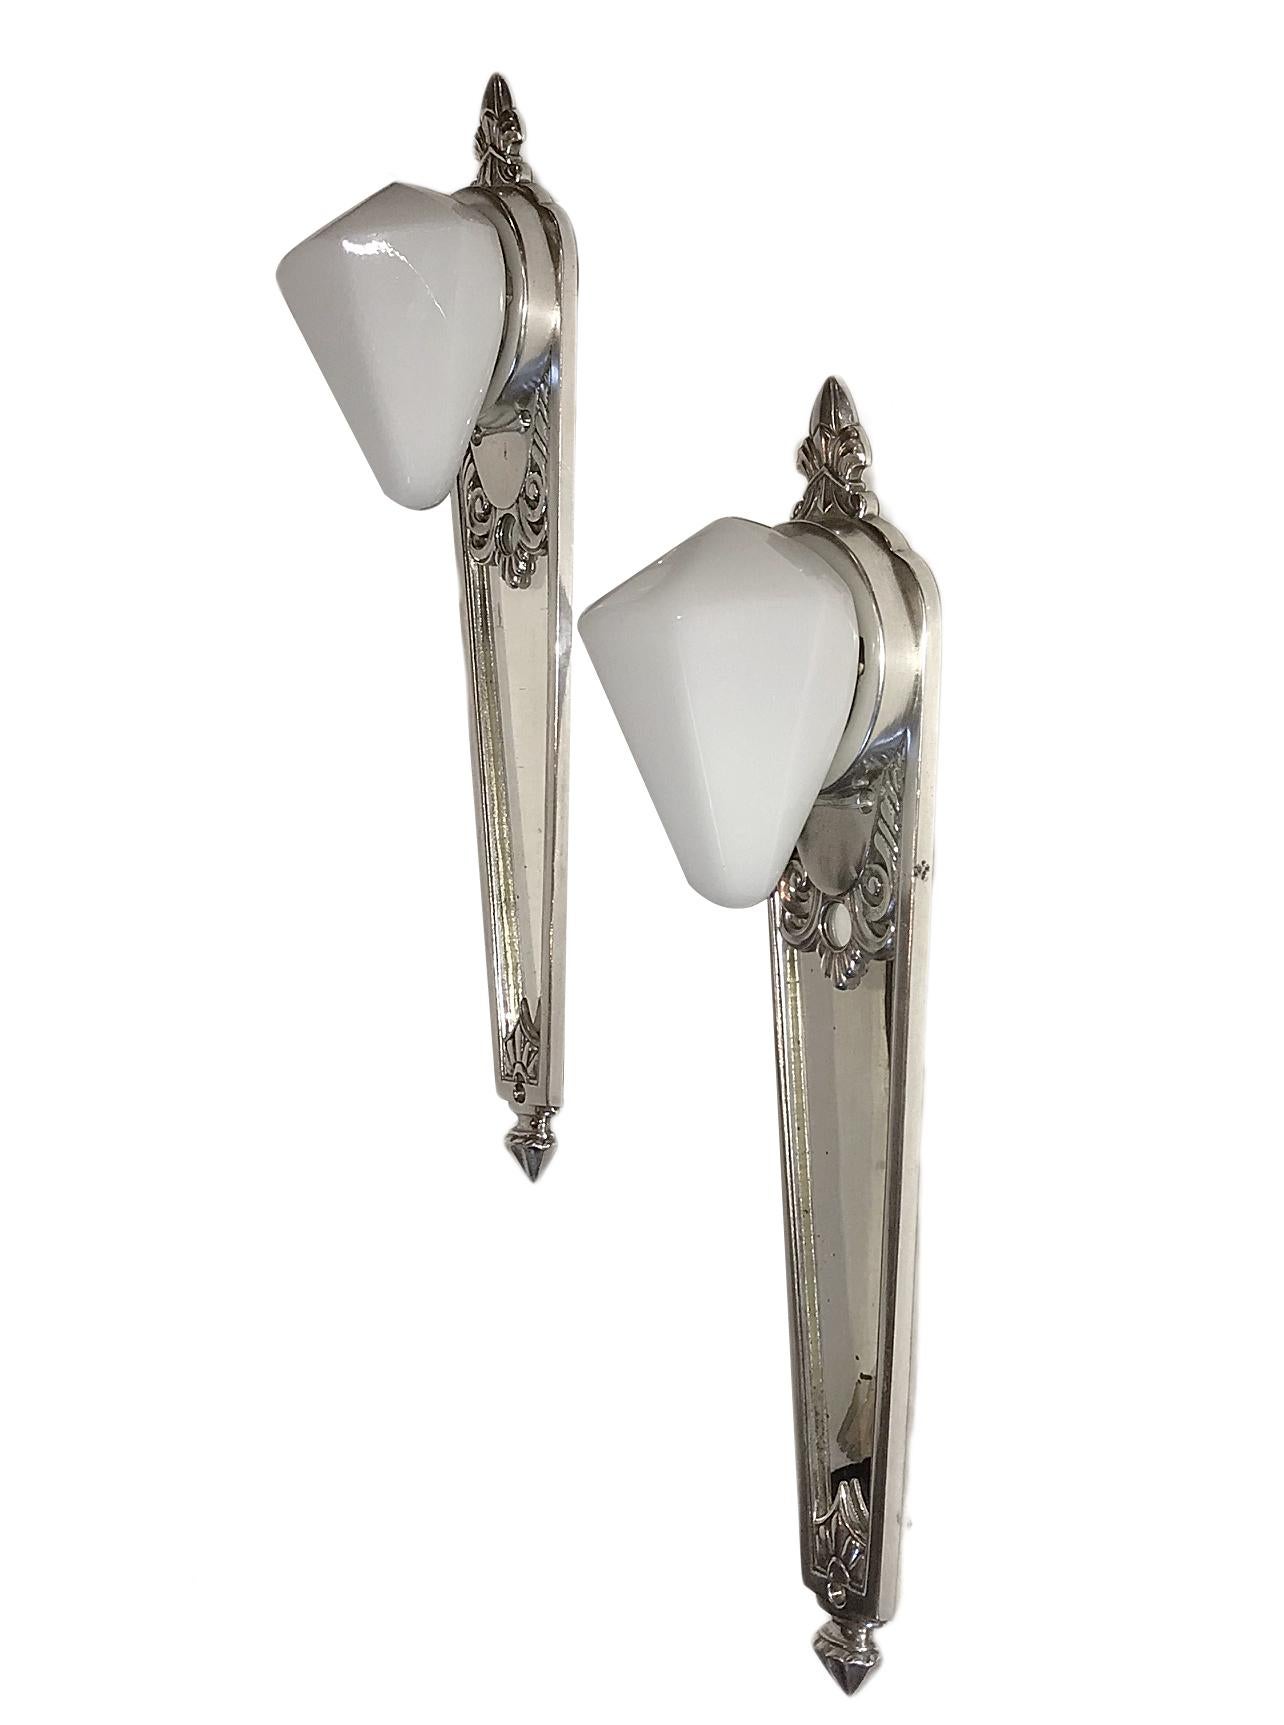 Pair of 1930s French nickel-plated sconces with milk glass shades, mirror backplate.

Measurements:
Height 15